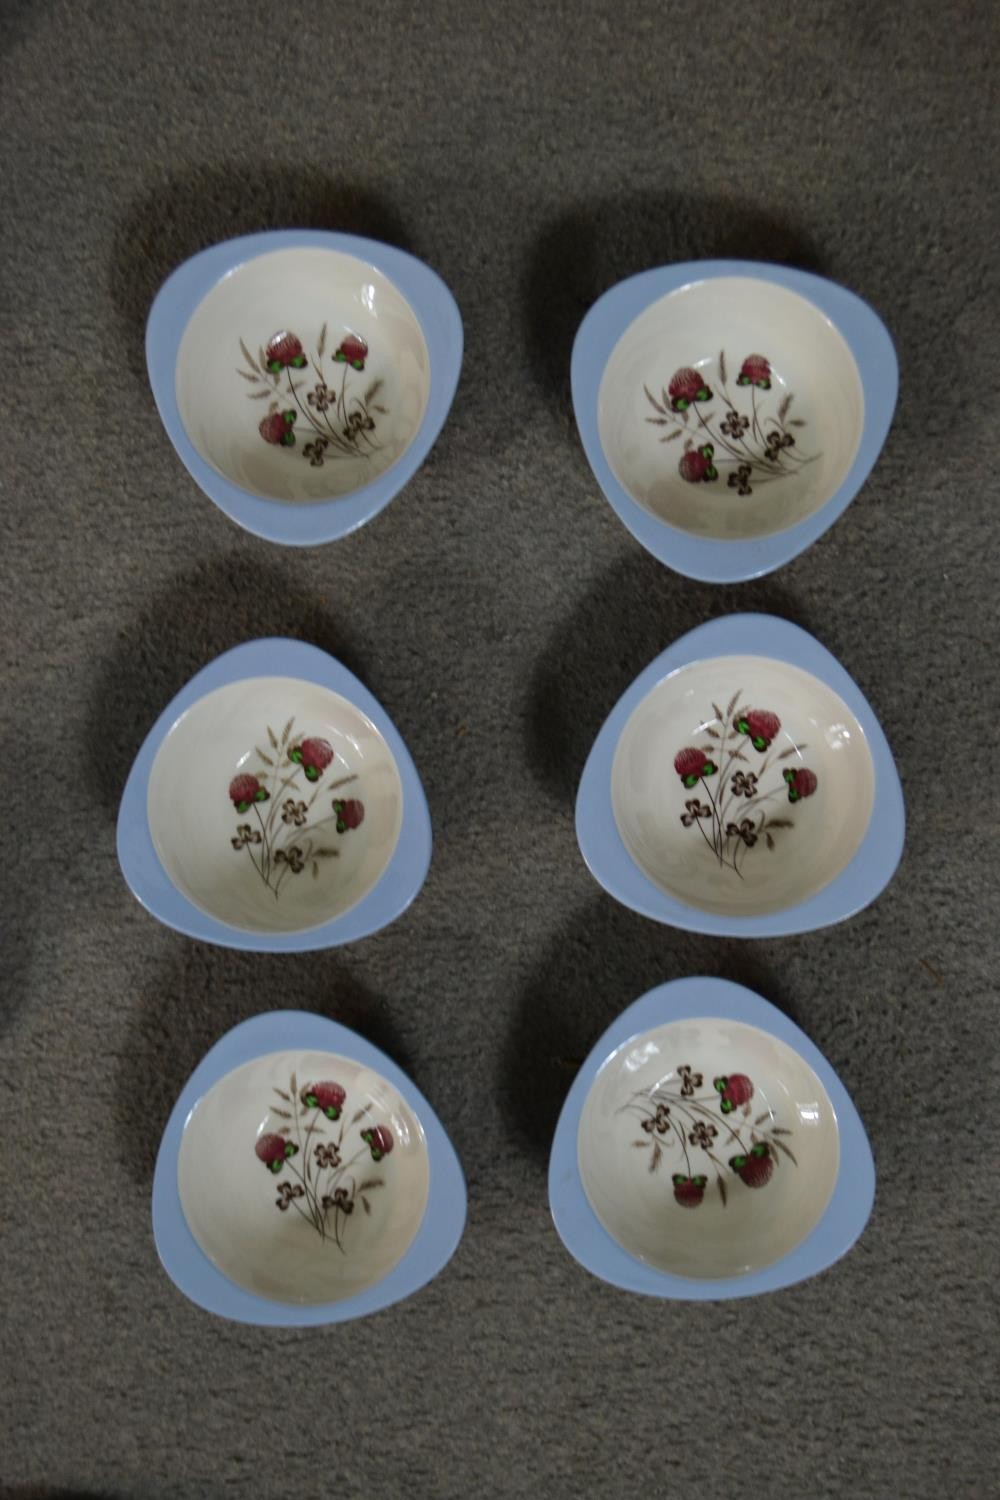 A 20th century Copeland Spode dinner and tea set, 55 Pieces, with clover and other flowers, in a - Image 3 of 8